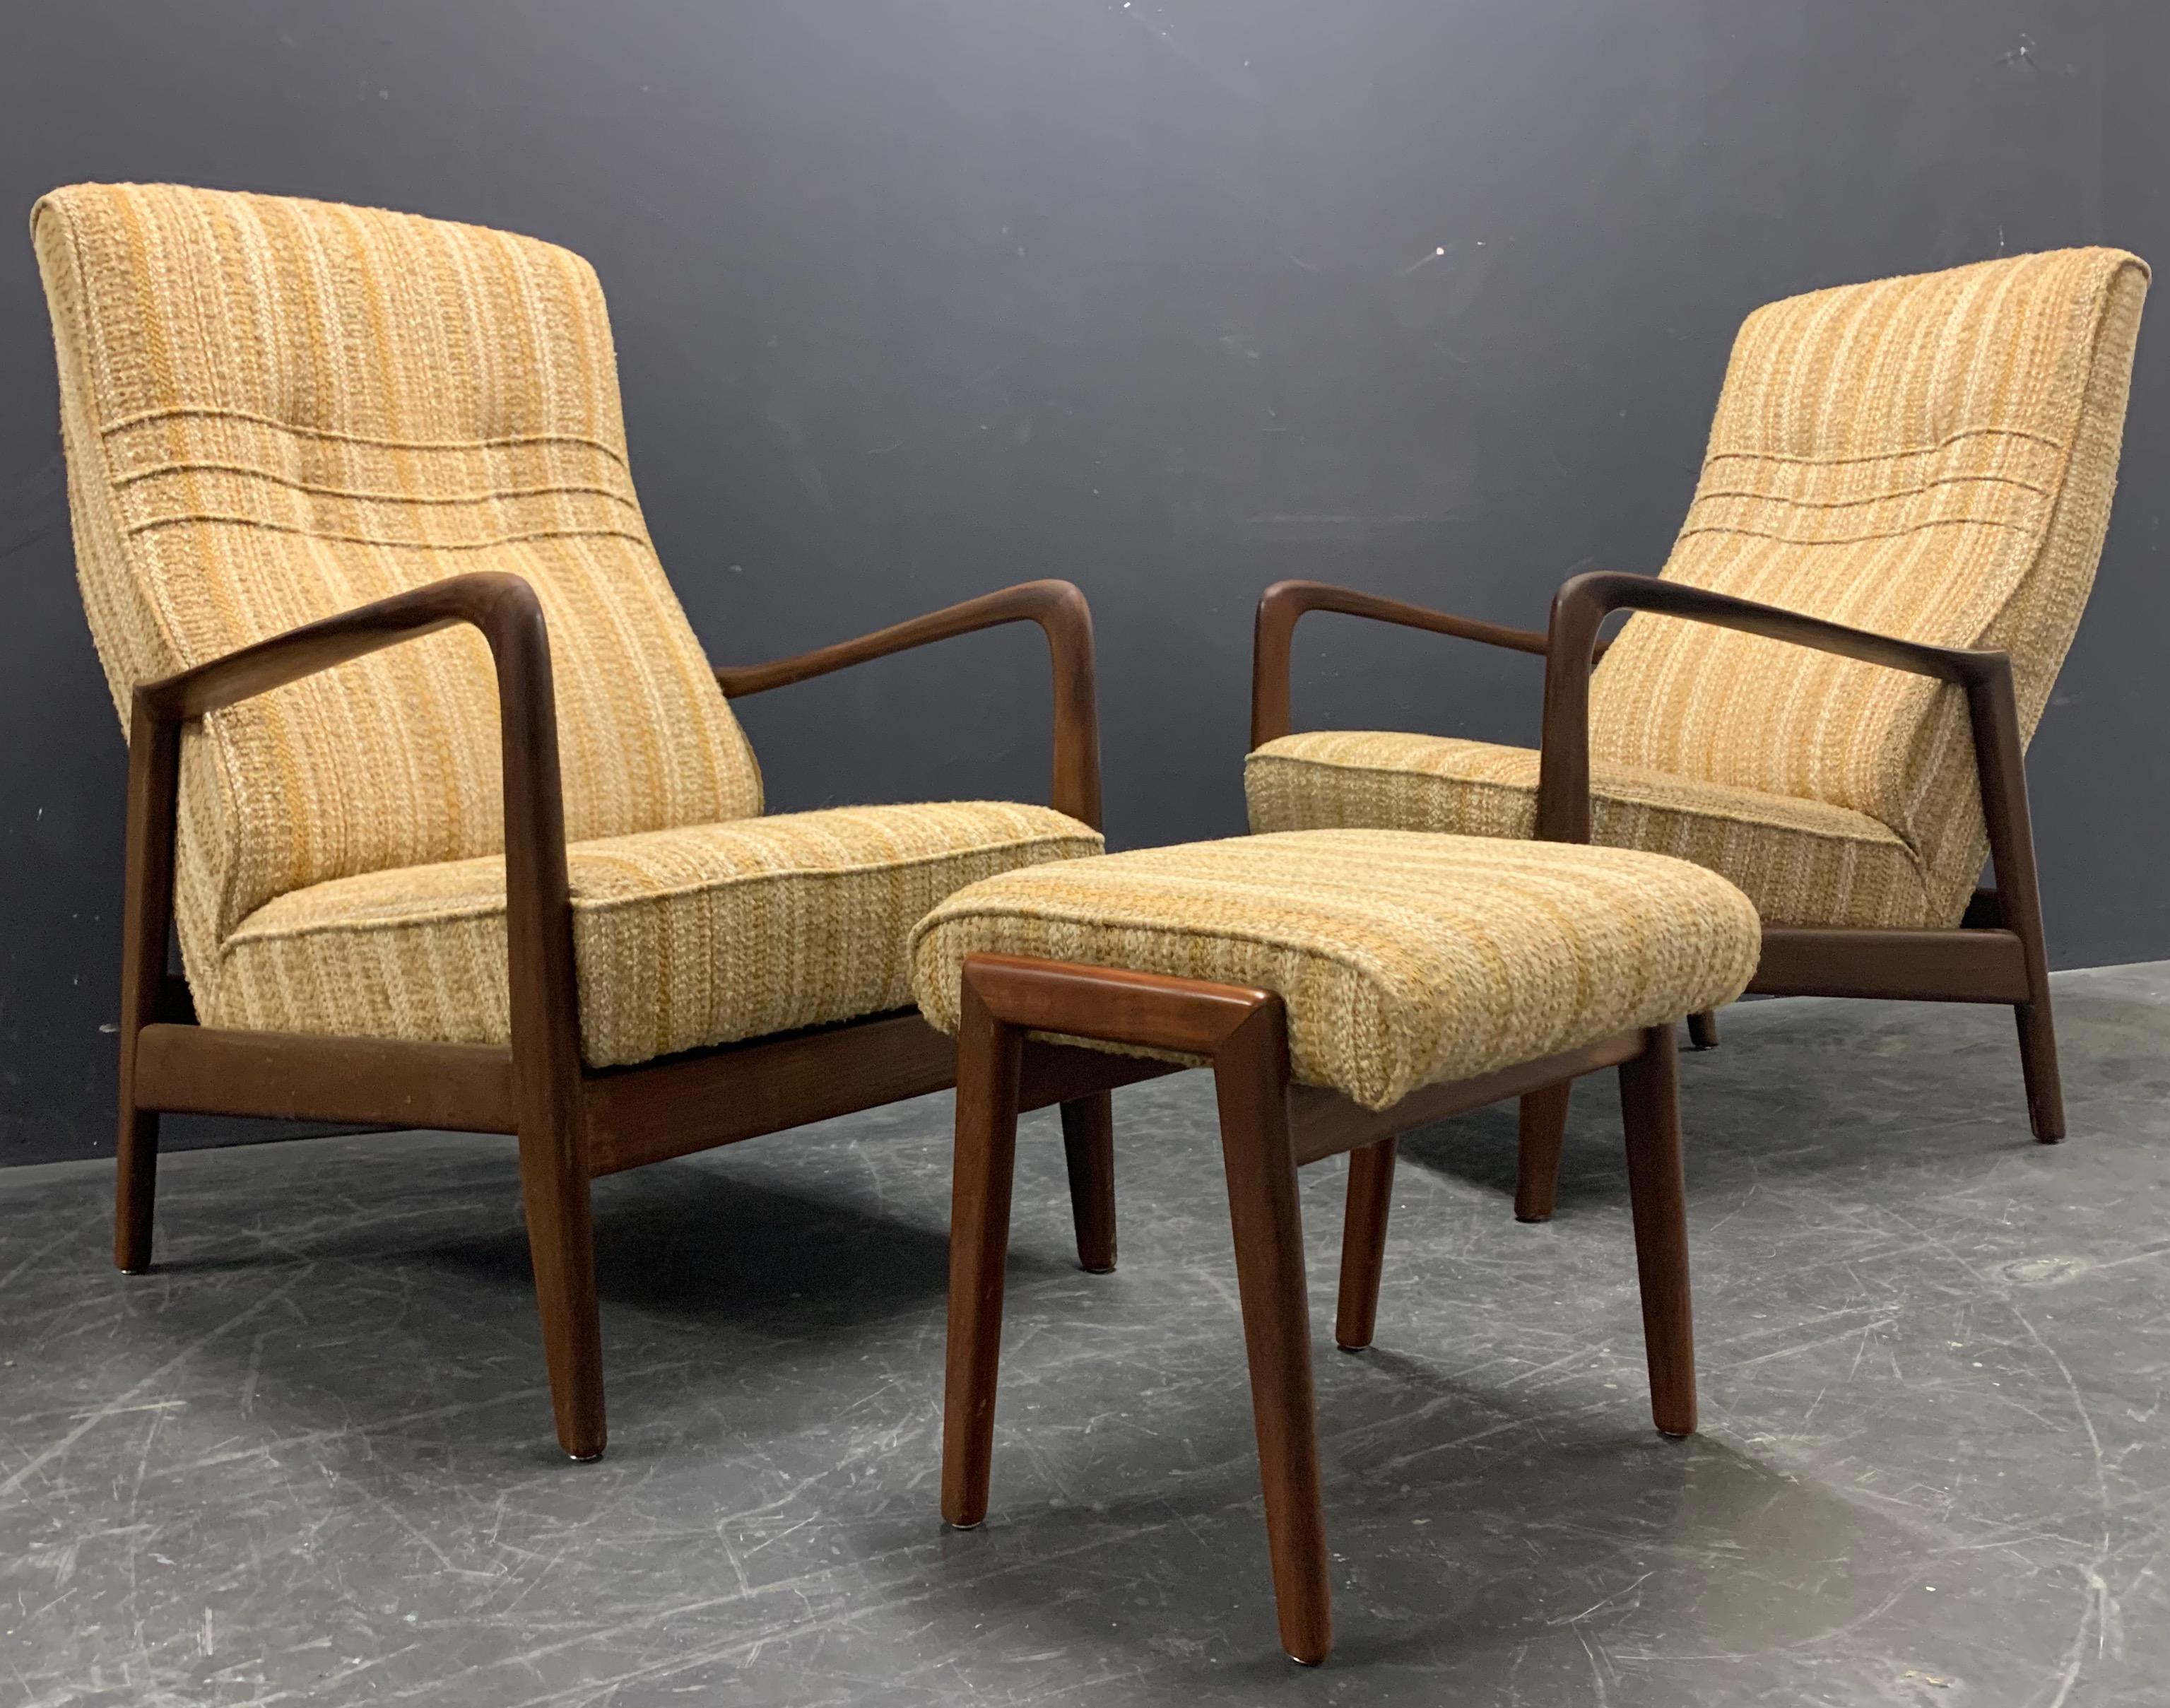 Foam and wonderful fabric in good condition. Very rare low back version - used by gio ponti for the famous hotel parco dei principi in sorrento. Made by Cassina.